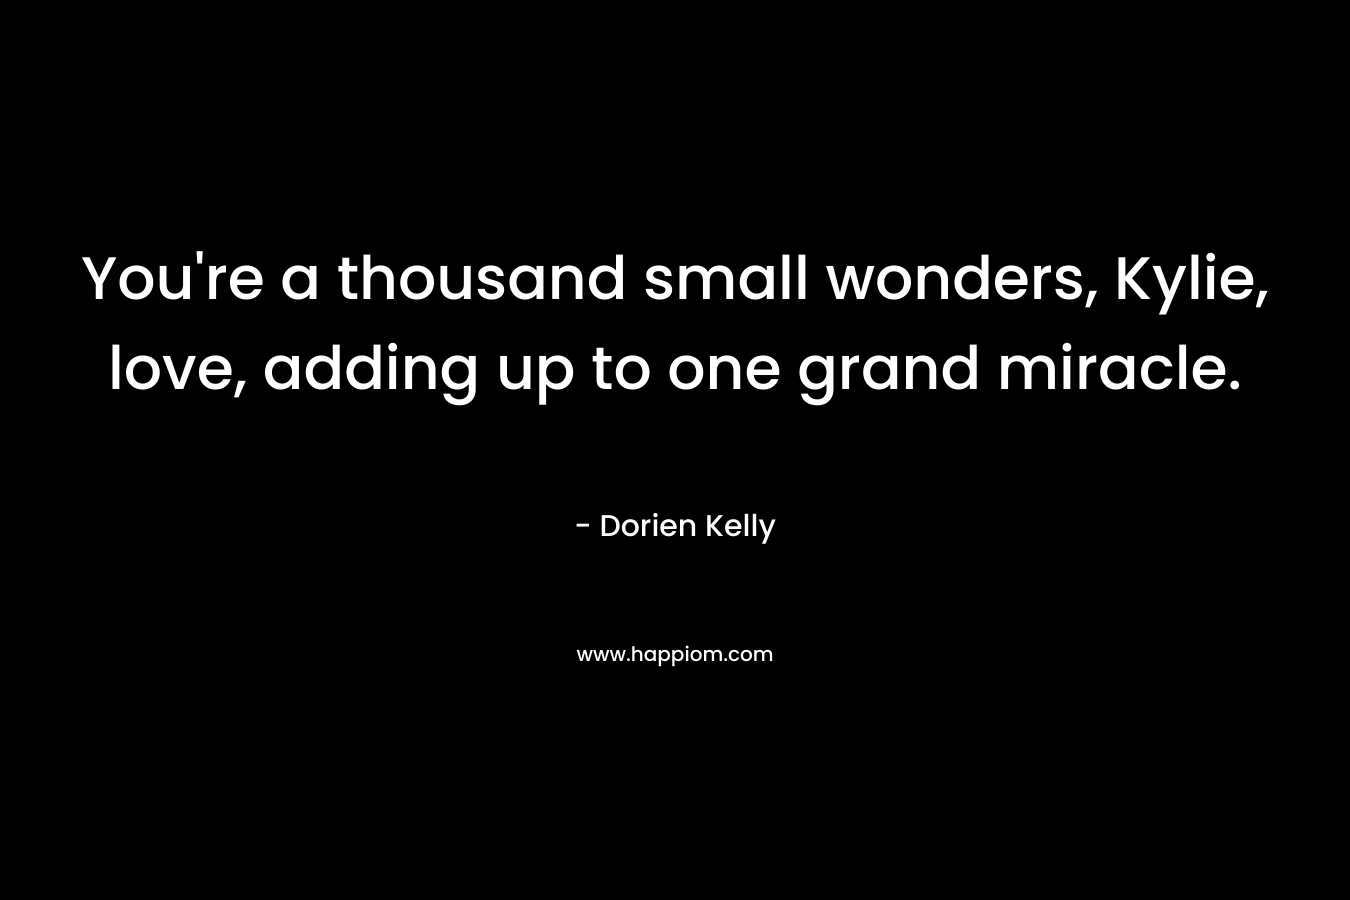 You’re a thousand small wonders, Kylie, love, adding up to one grand miracle. – Dorien Kelly